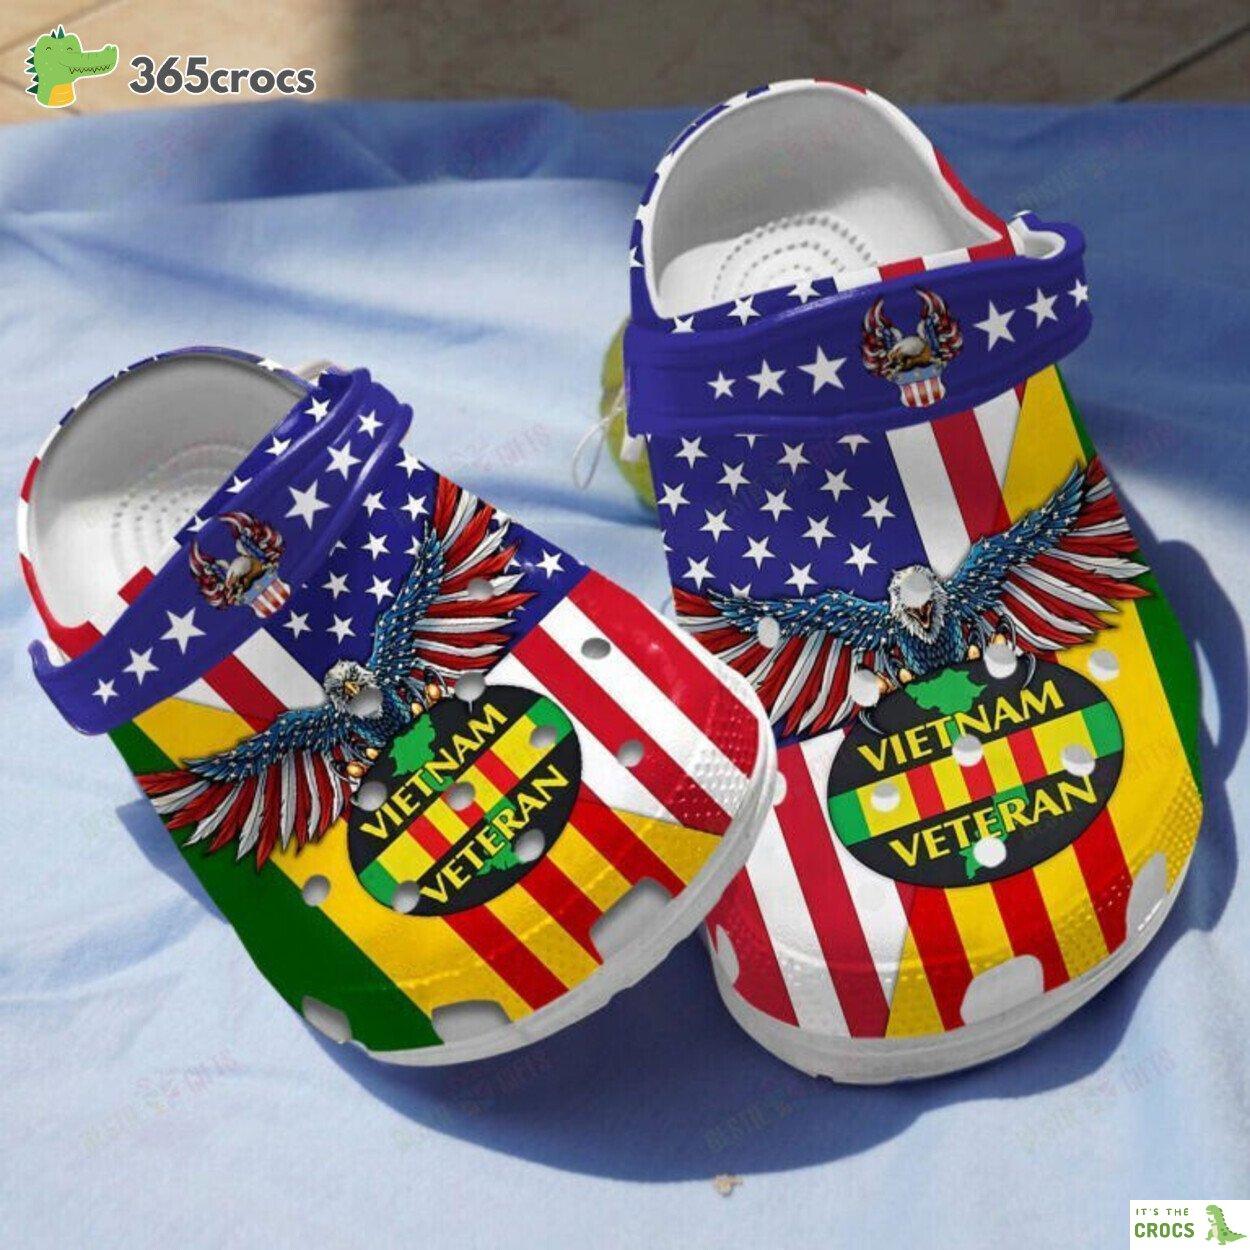 Vietnam Veteran Clogs Ideal Birthday Gift to Honor Service and Bravery